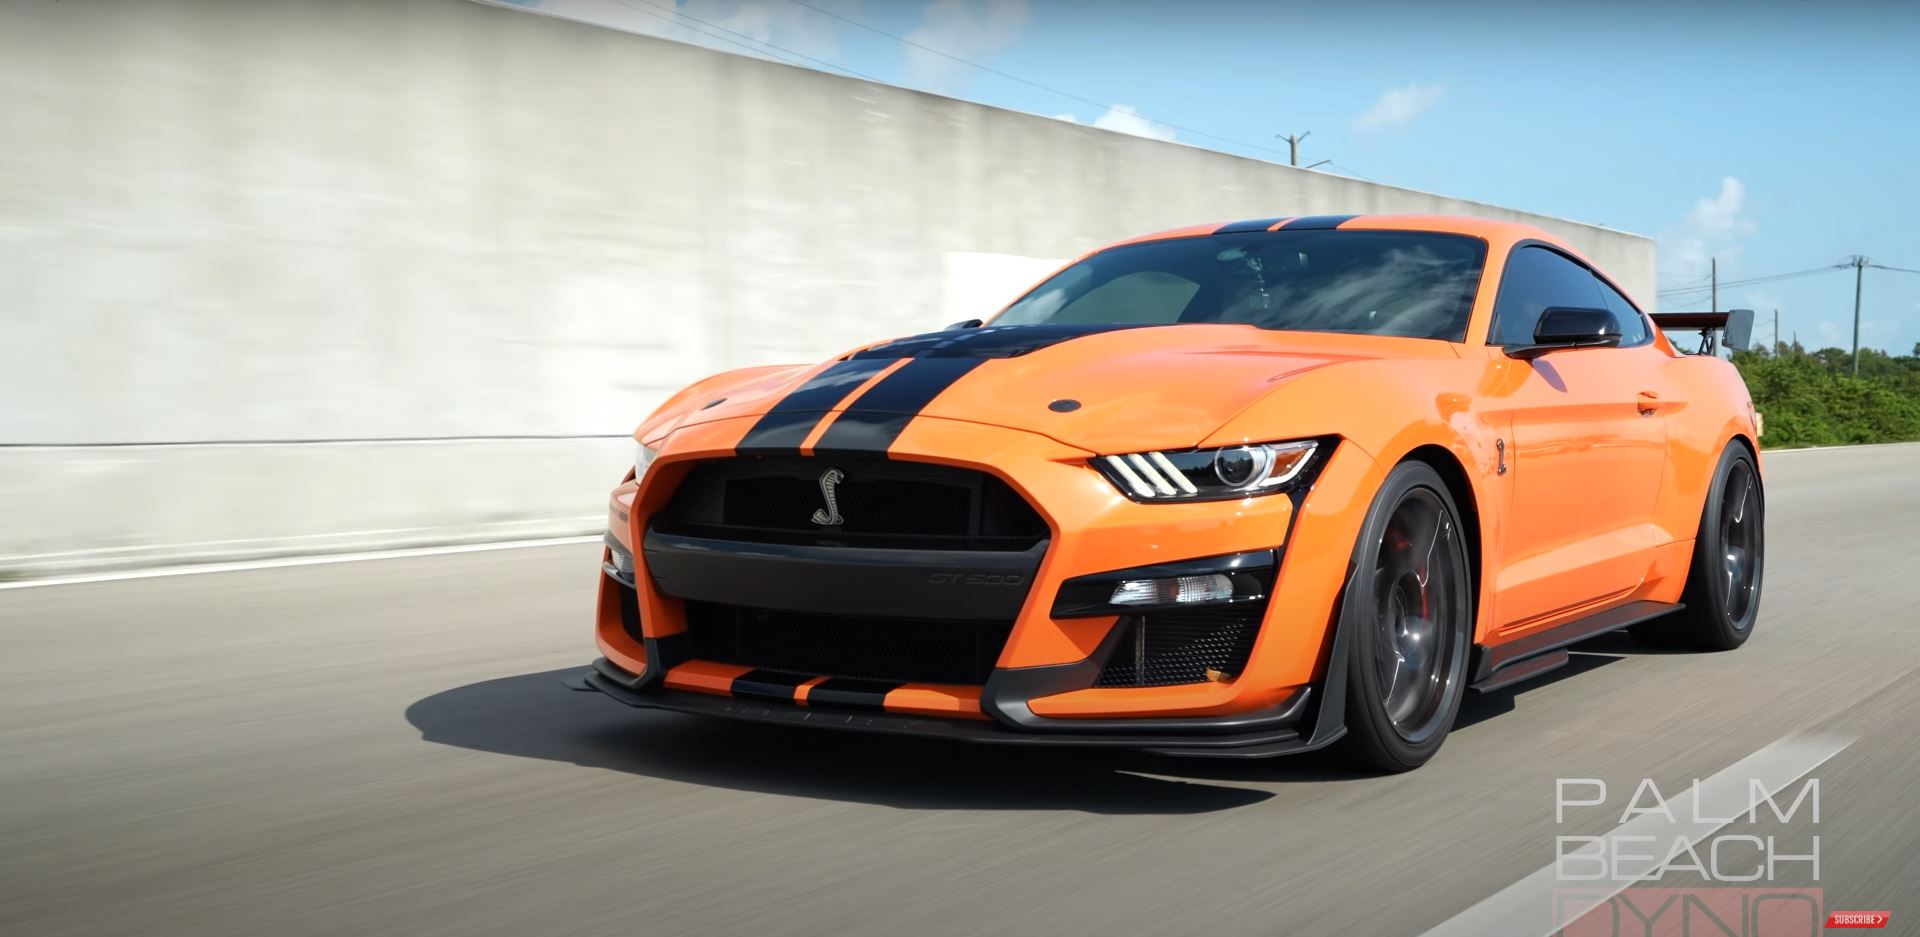 Shelby GT500 Is Reborn With More Power, Looks Bold Enough to Challenge  Supercars - autoevolution